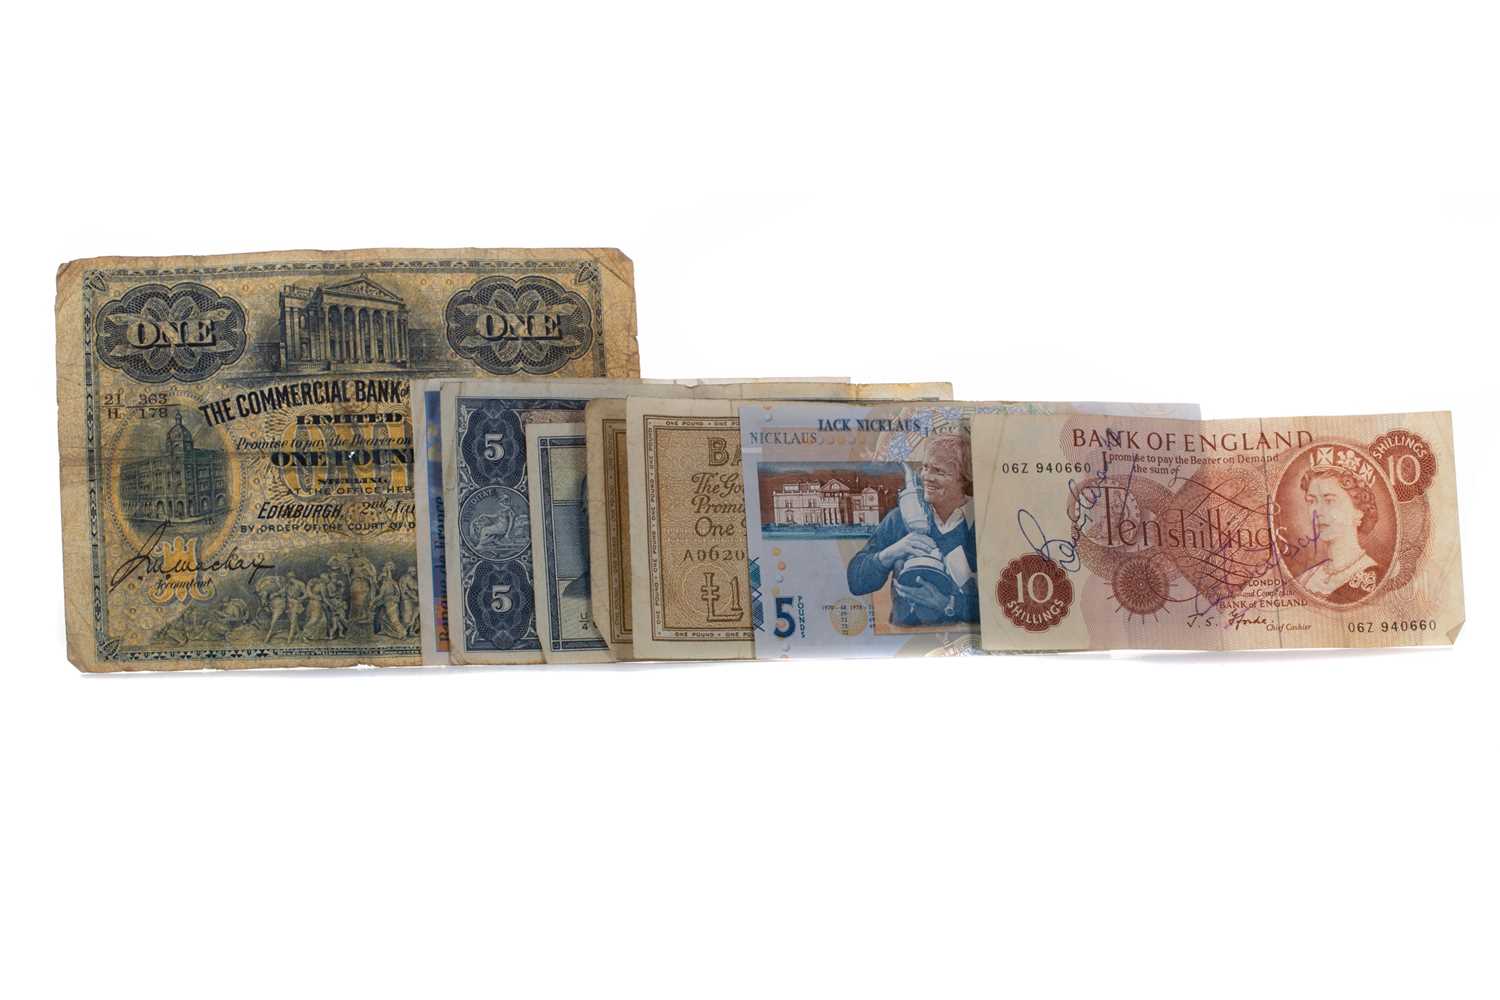 Lot 83 - A 1923 COMMERCIAL BANK OF SCOTLAND £1 NOTE AND OTHERS